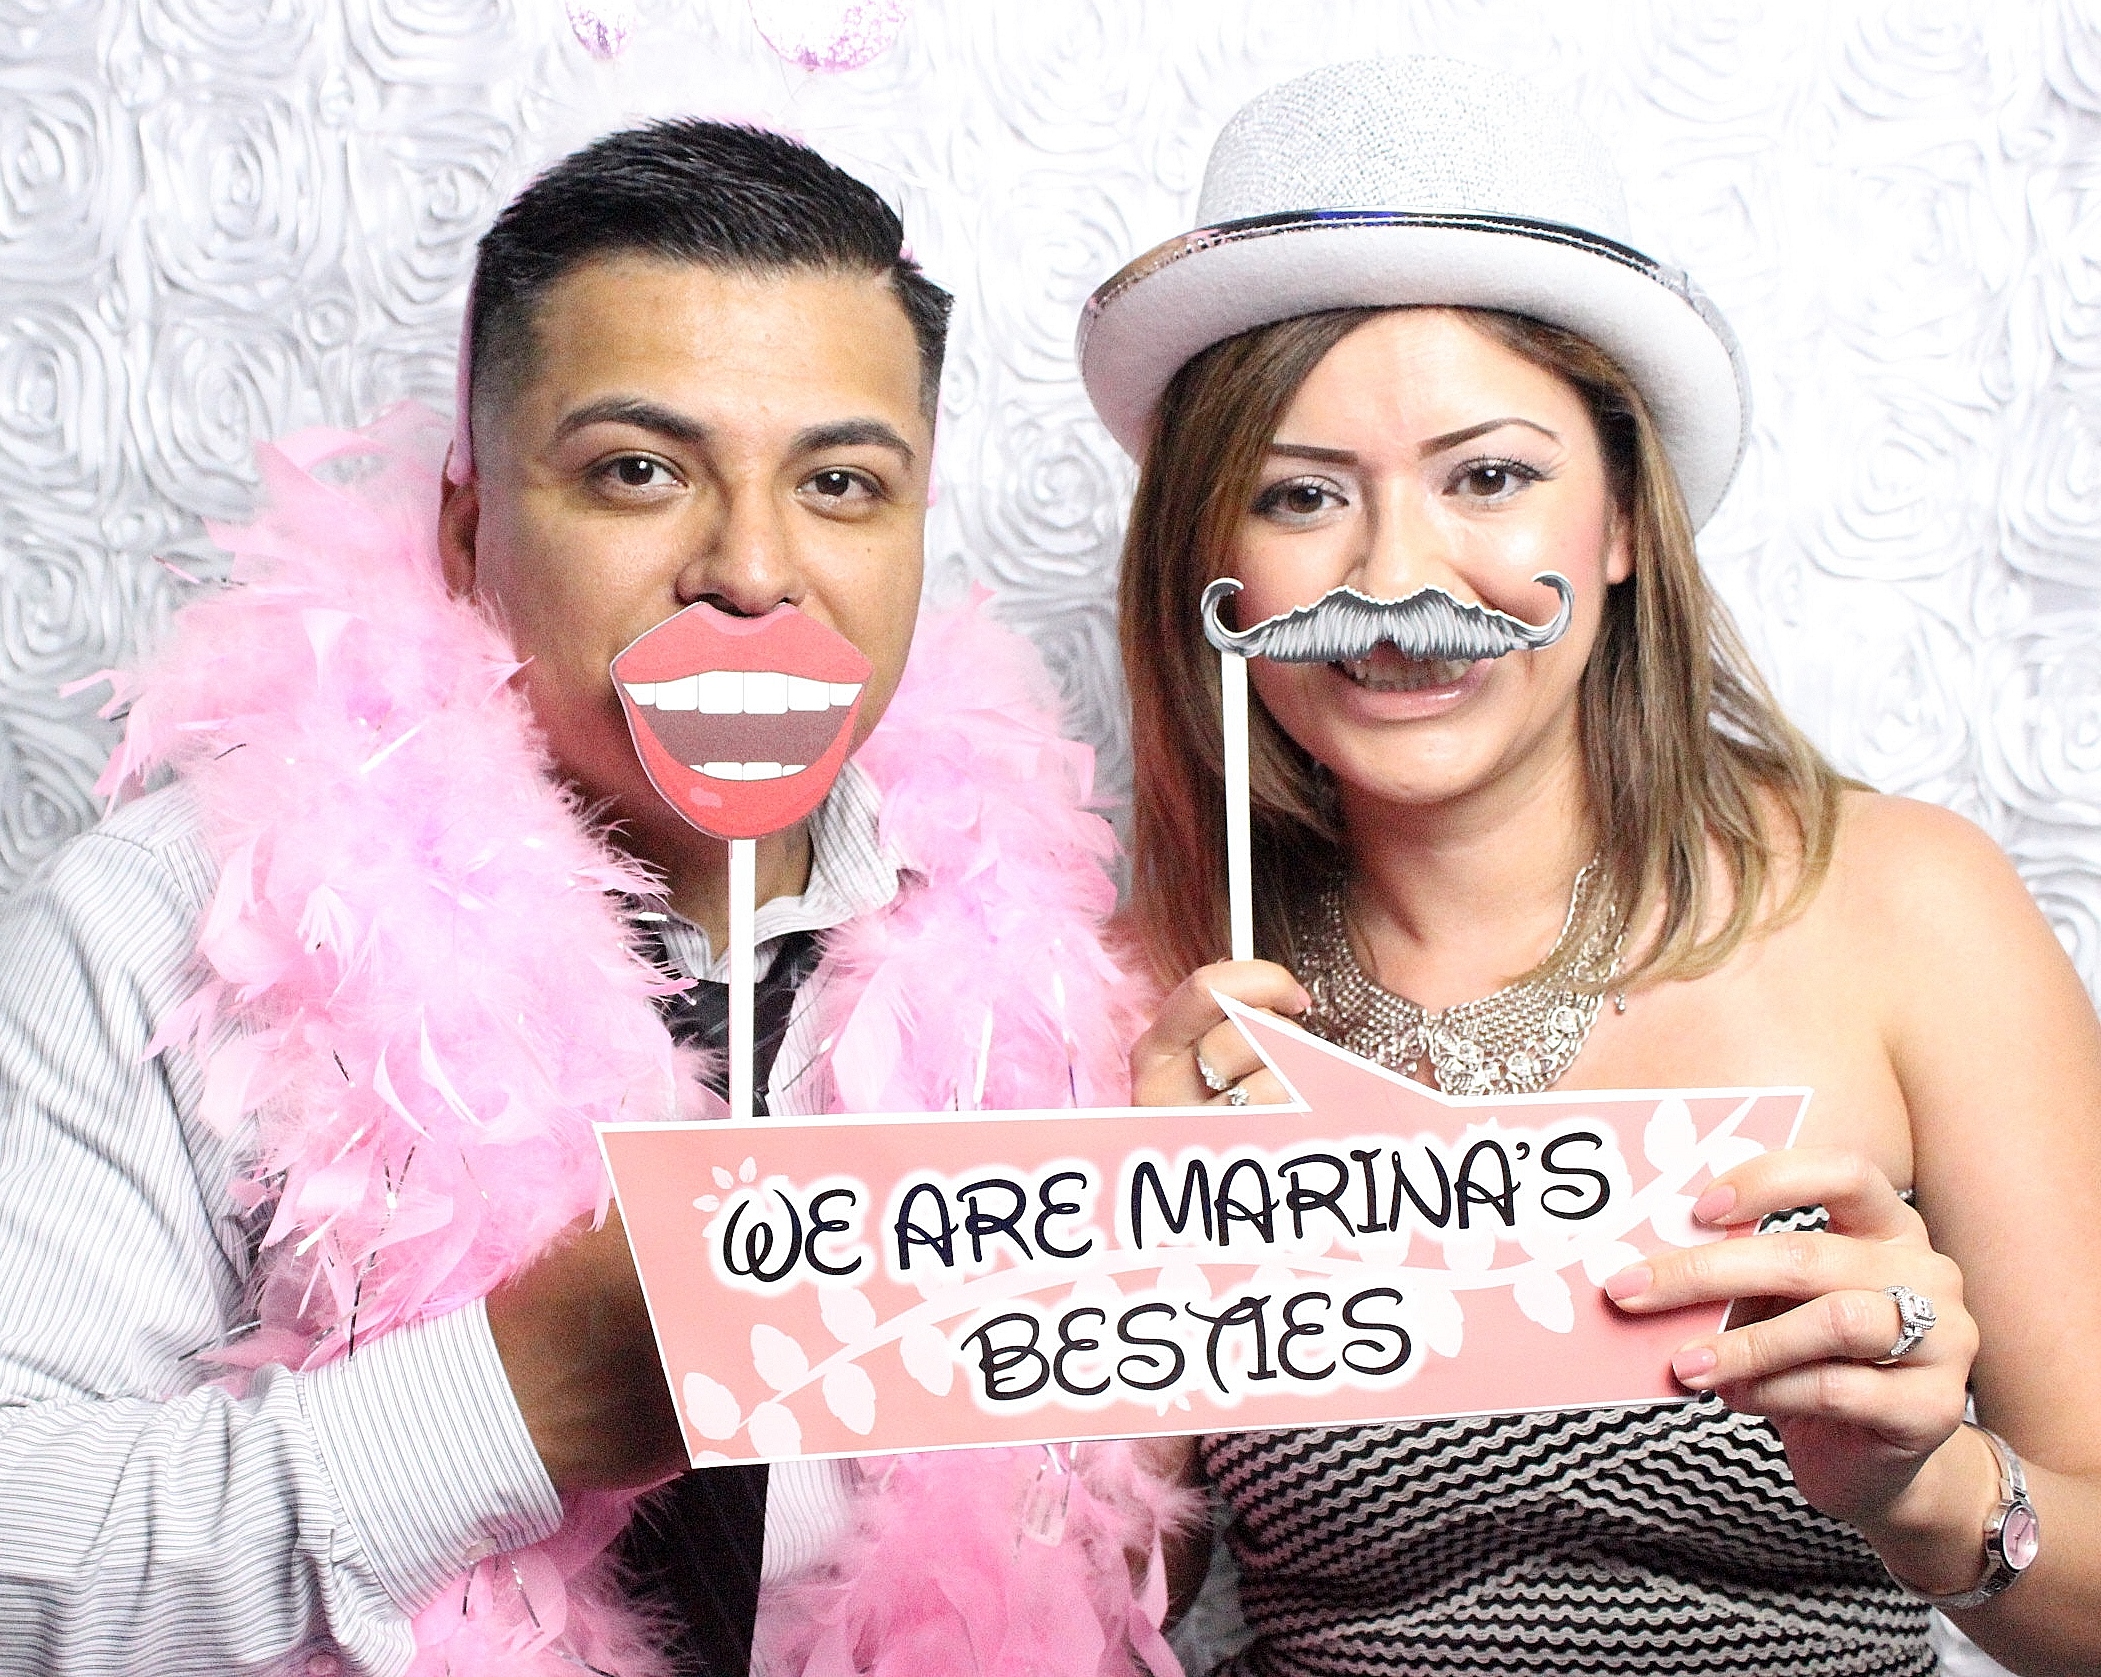 Personalized Photo Booth Props